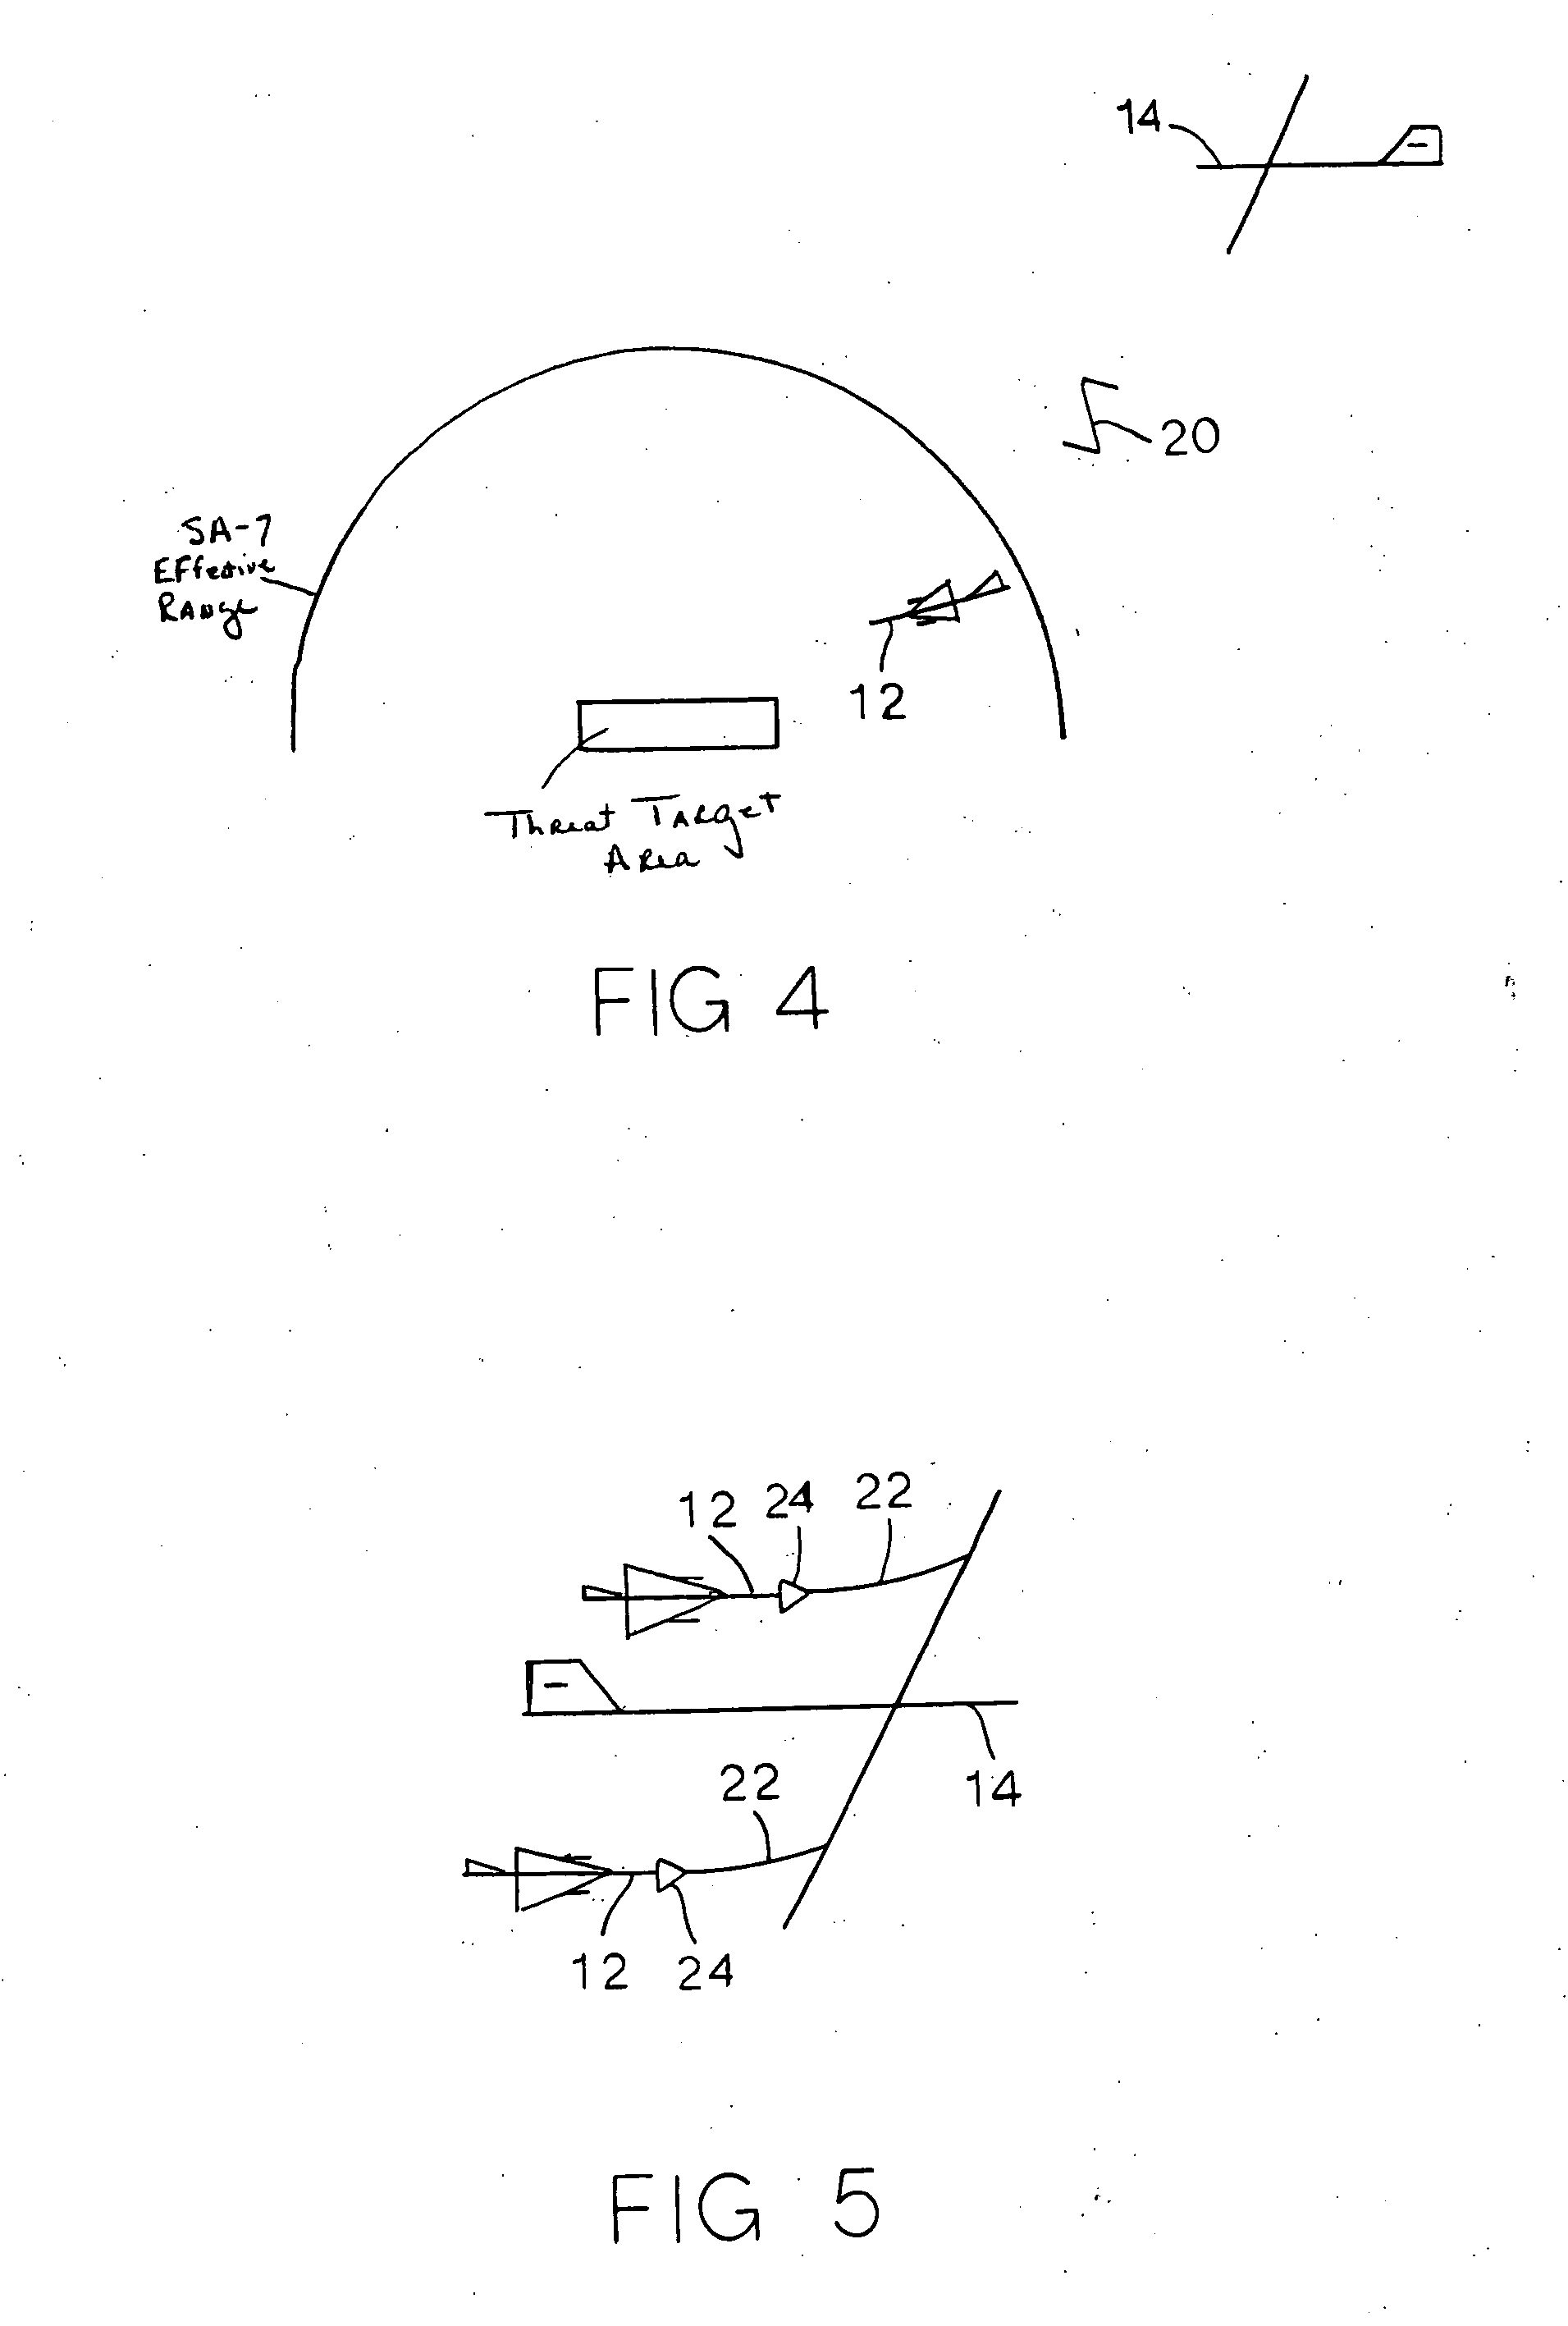 System and method for remote control of interdiction aircraft